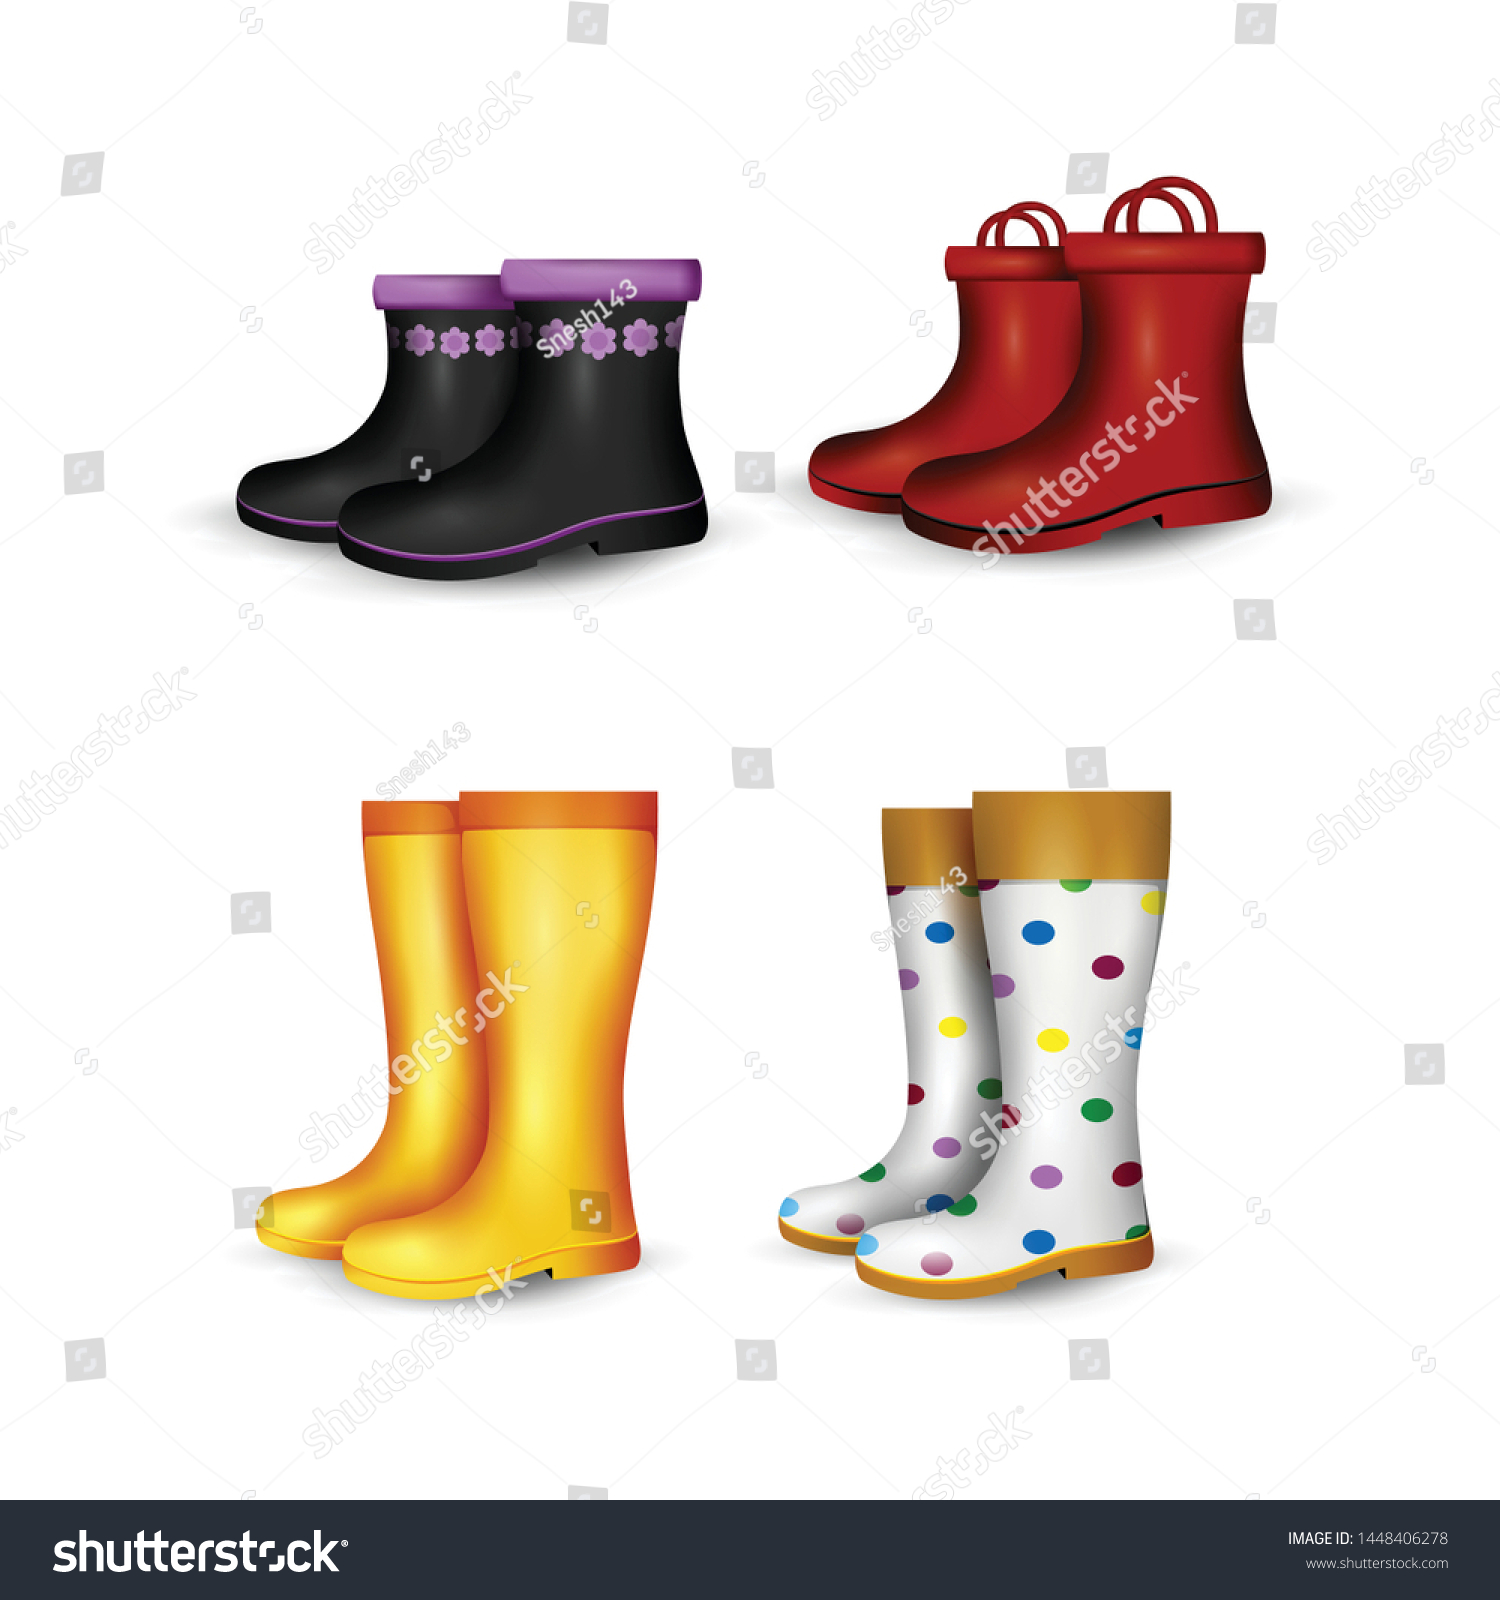 types of rubber boots